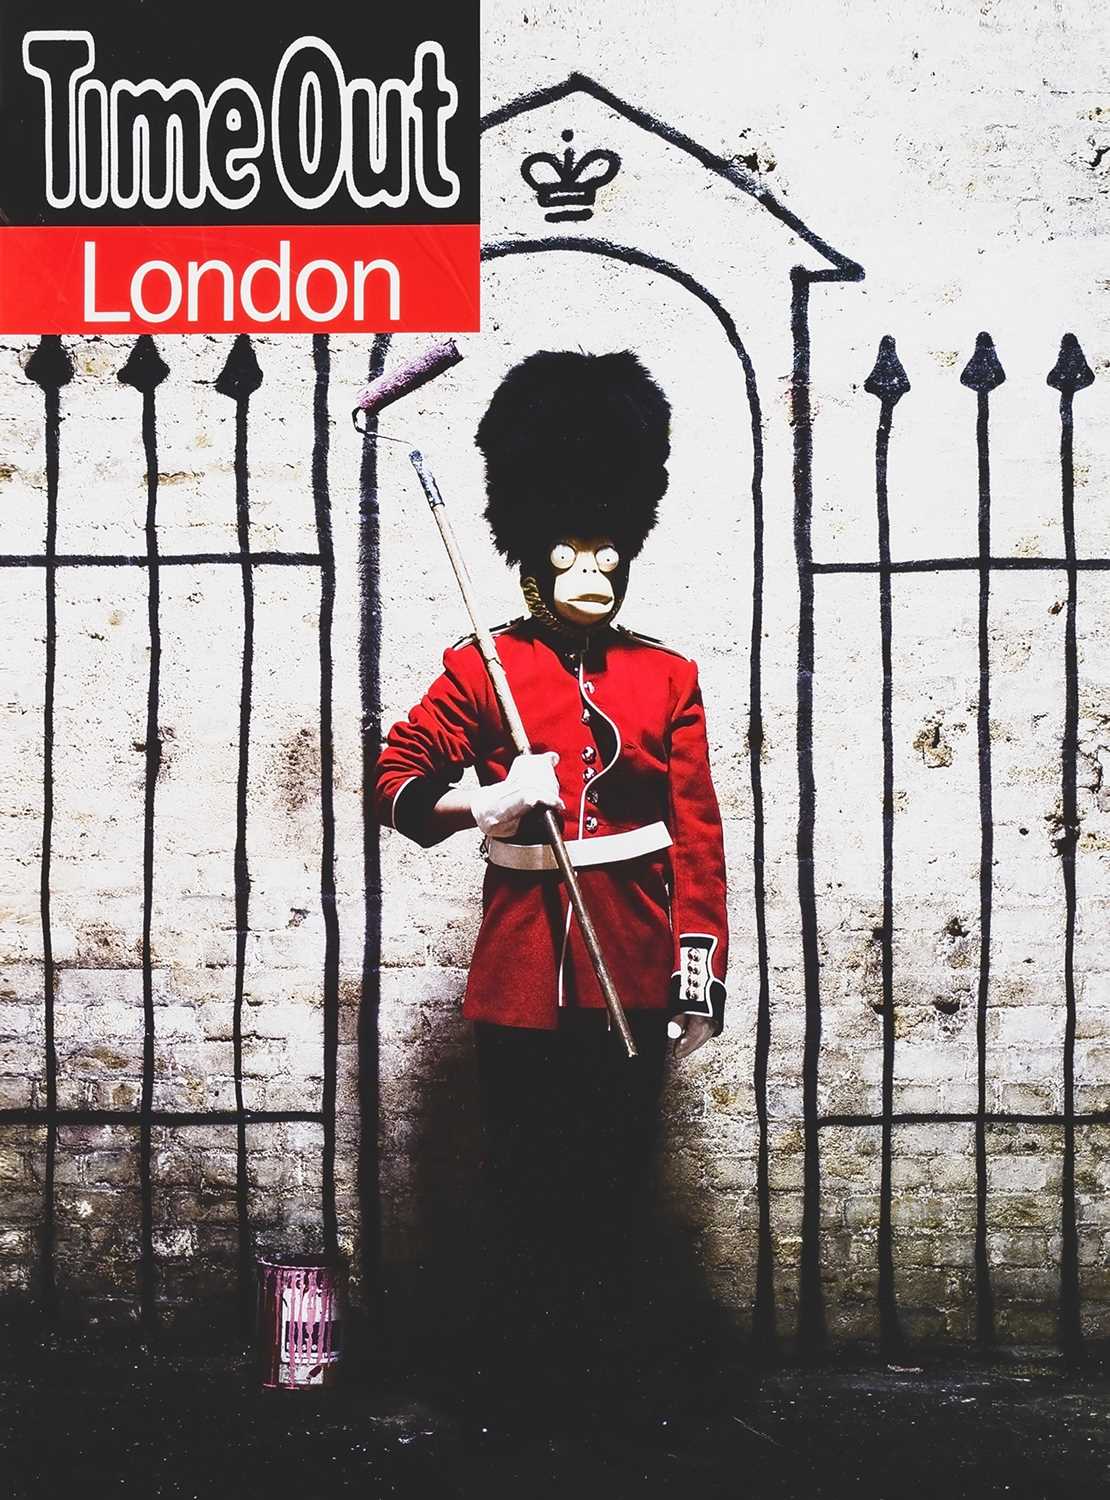 Lot 18 - Banksy (British 1974-), 'Time Out London', 2010